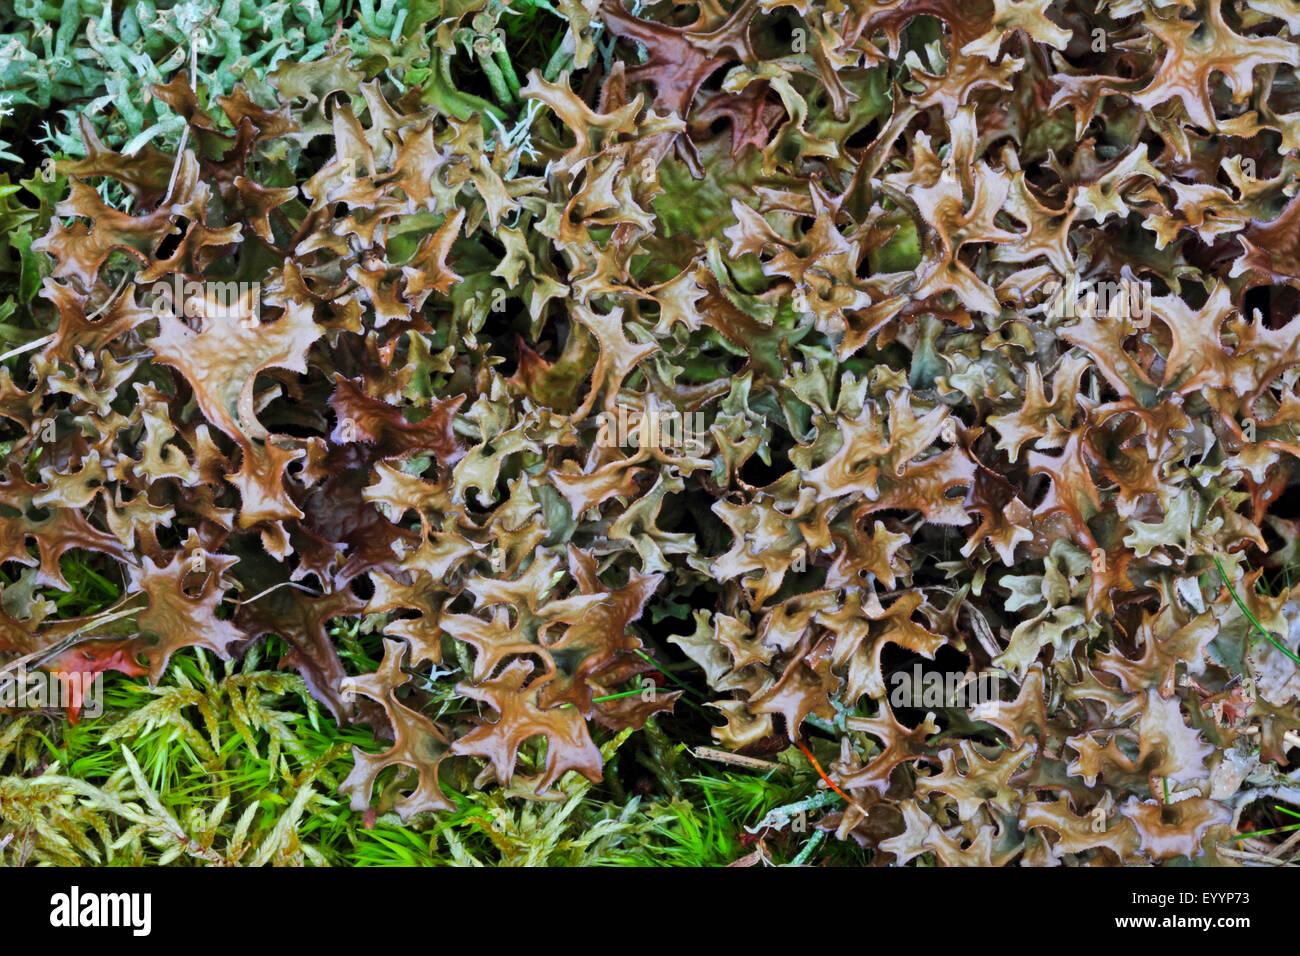 iceland-moss-cetraria-islandica-close-up-top-view-germany-EYYP73.jpg